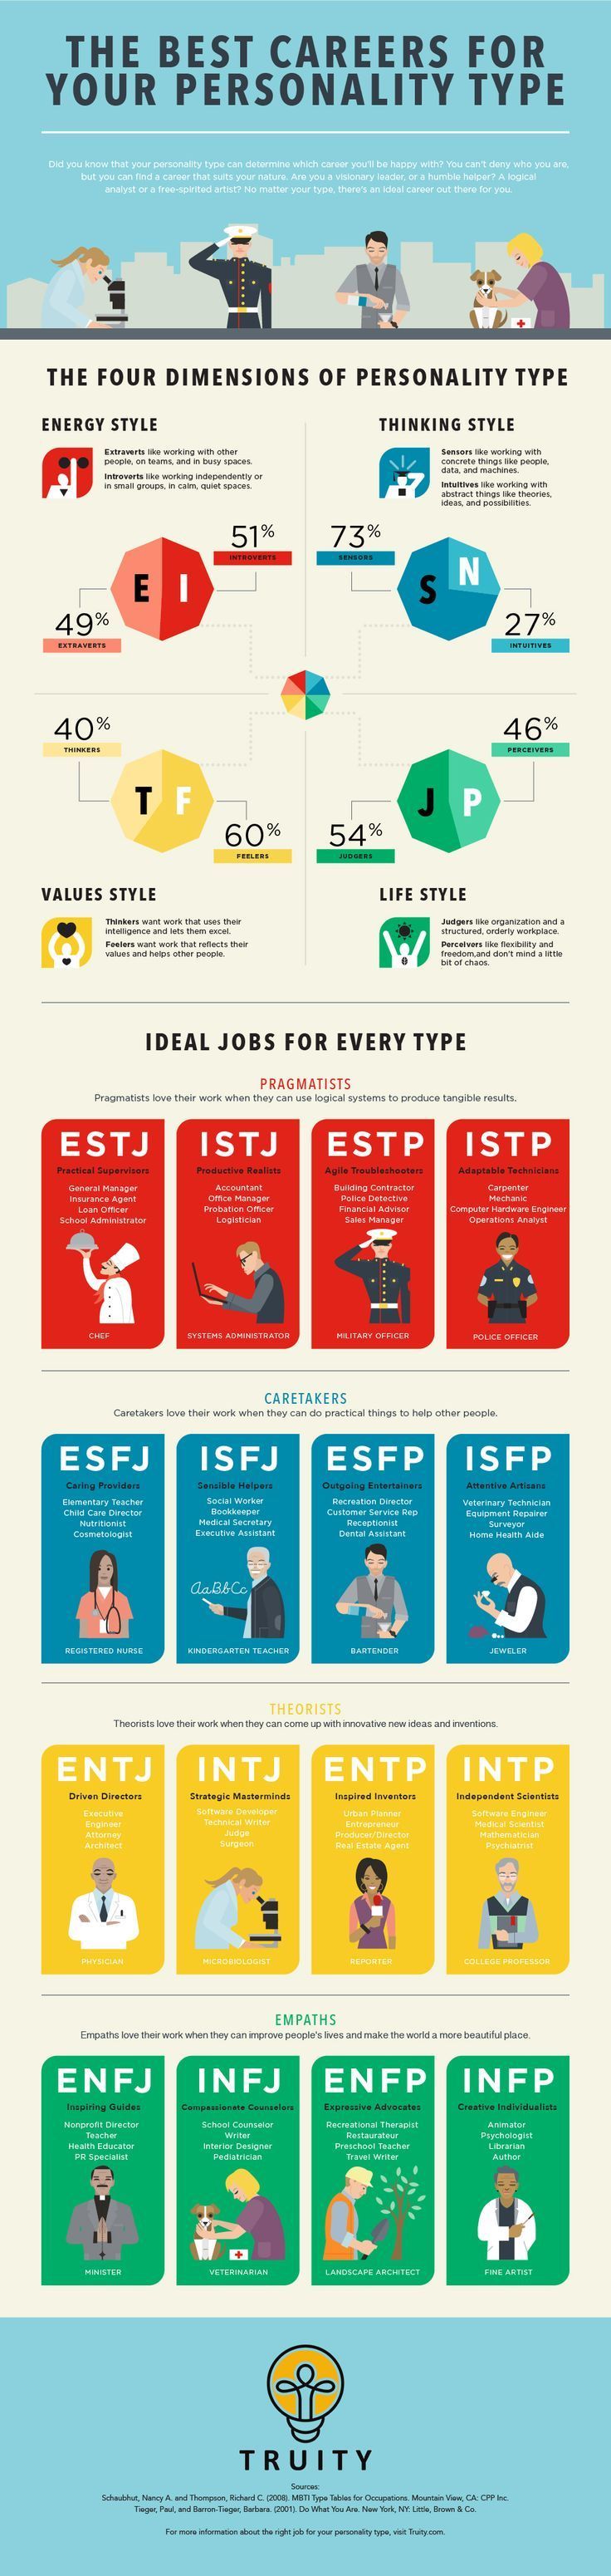 Infographic-The-Best-Careers-for-Your-Personality-Type-Infographic Infographic : The Best Careers for Your Personality Type (Infographic)